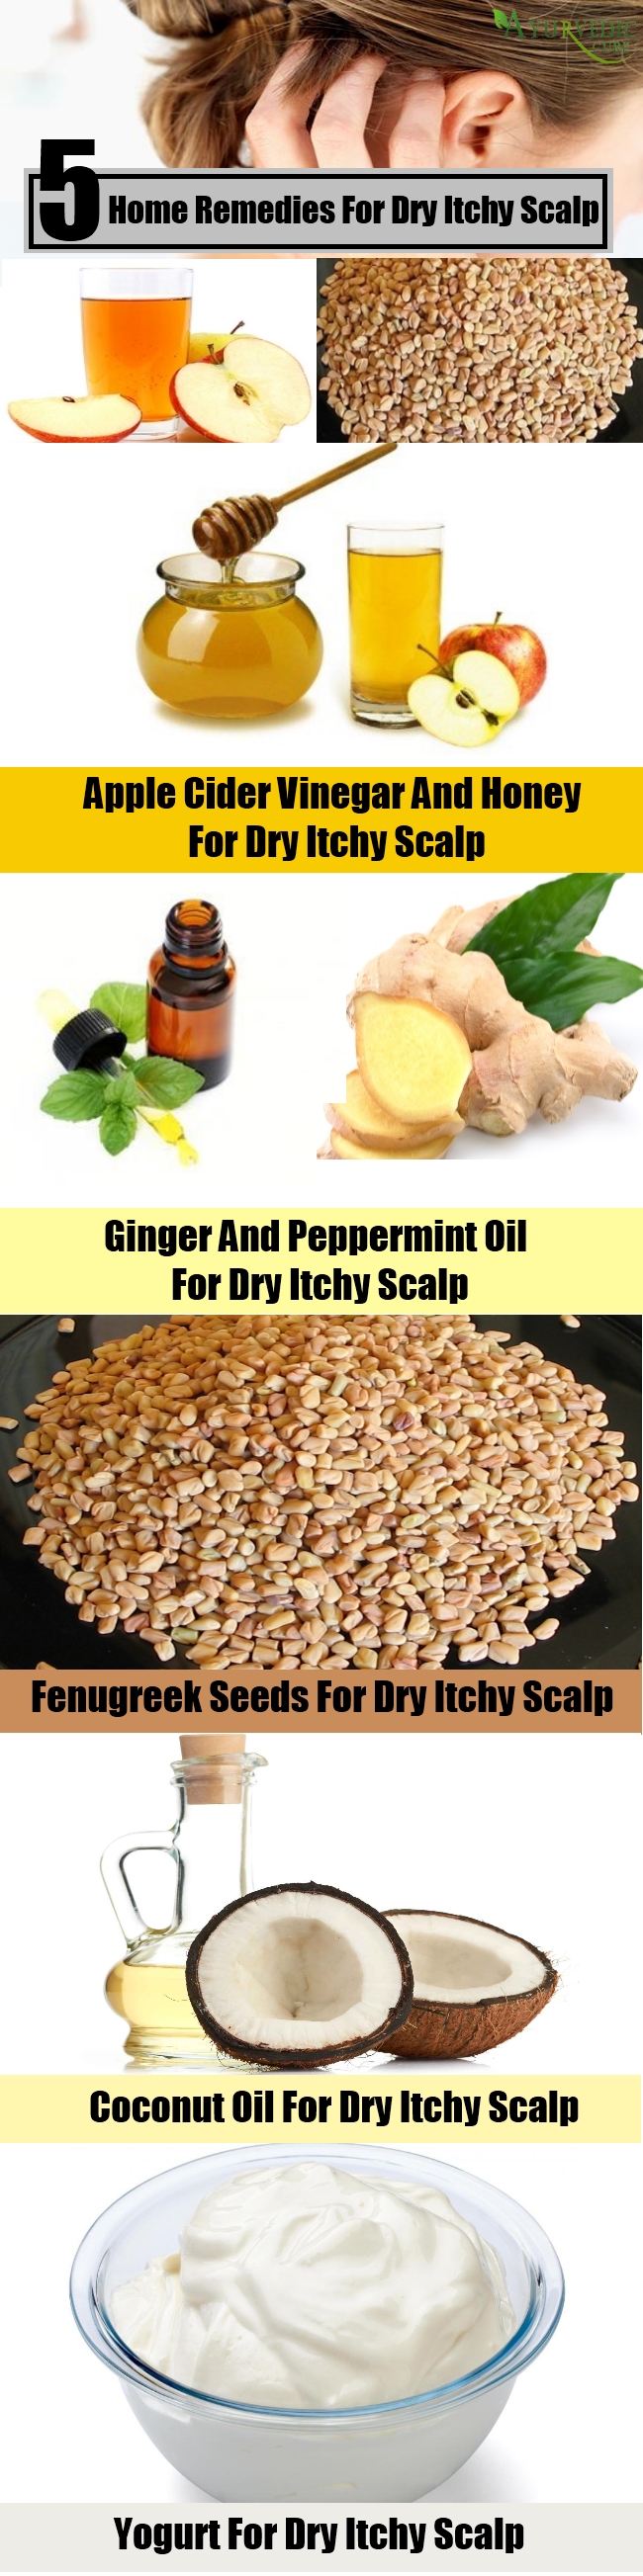 5 Home Remedies For Dry Itchy Scalp